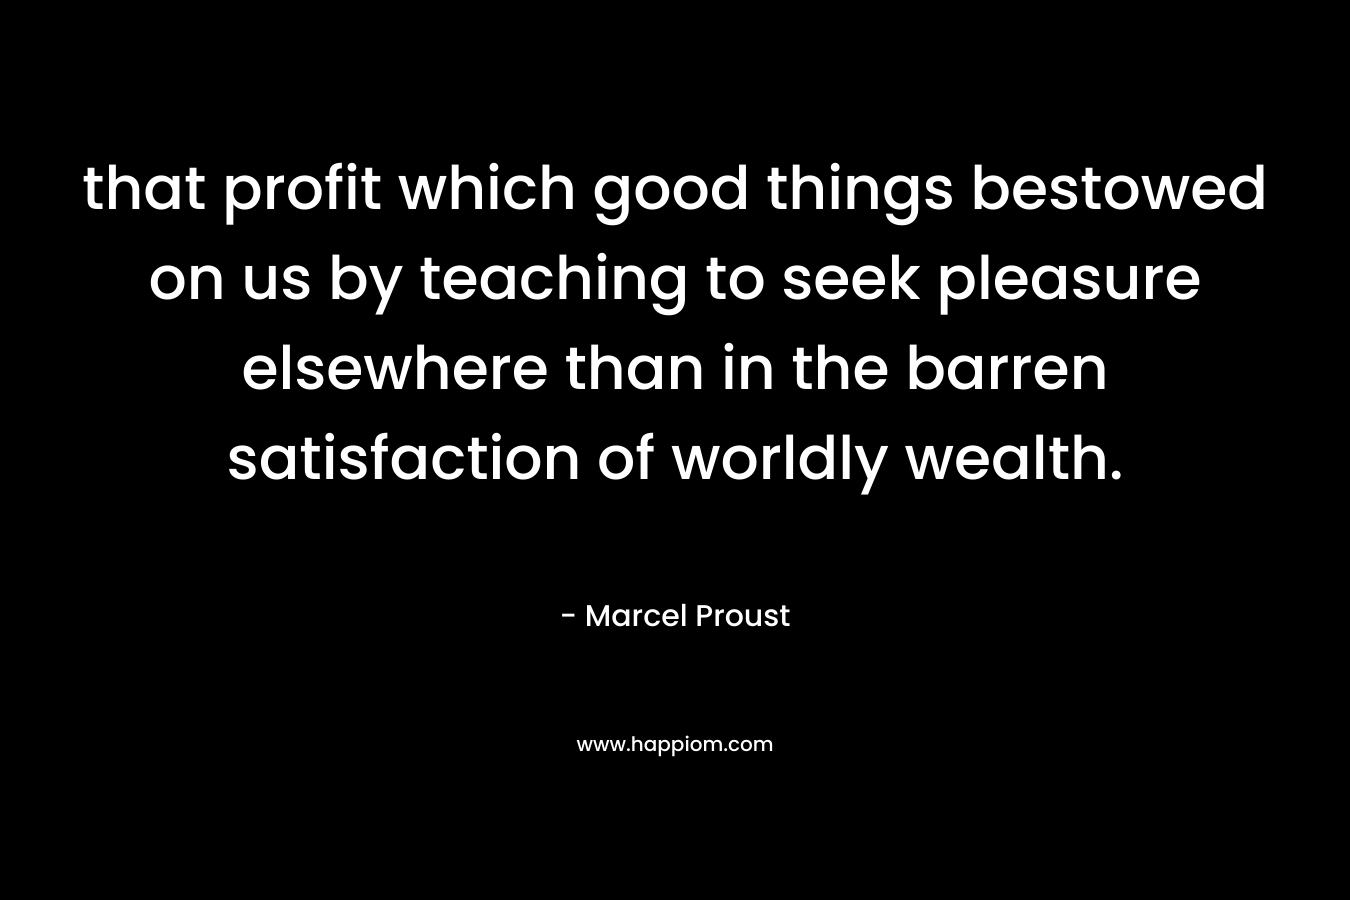 that profit which good things bestowed on us by teaching to seek pleasure elsewhere than in the barren satisfaction of worldly wealth.